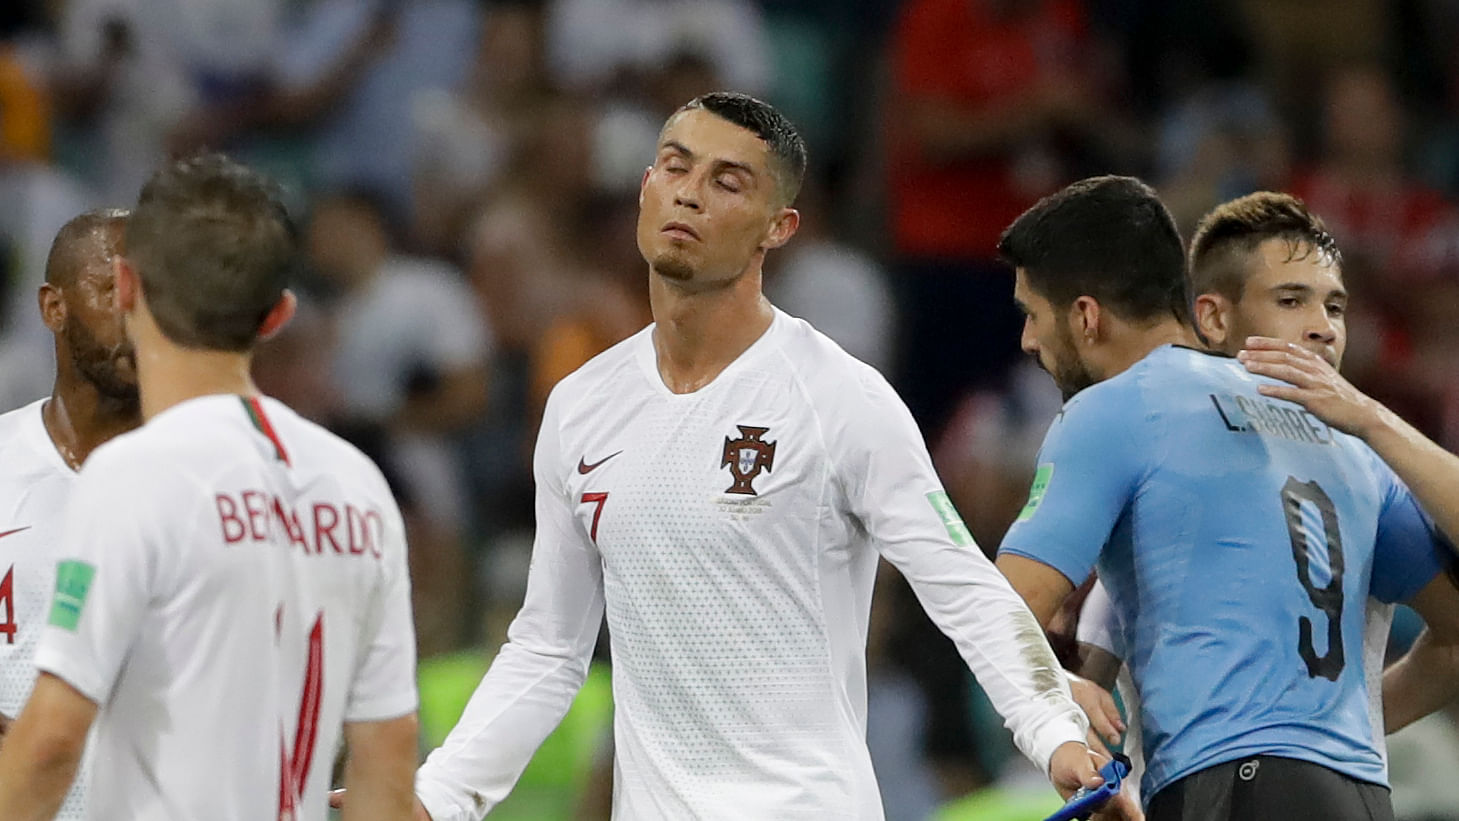 Portugal’s Cristiano Ronaldo, center, reacts after the round of 16 match between Uruguay and Portugal at the 2018 FIFA World Cup.